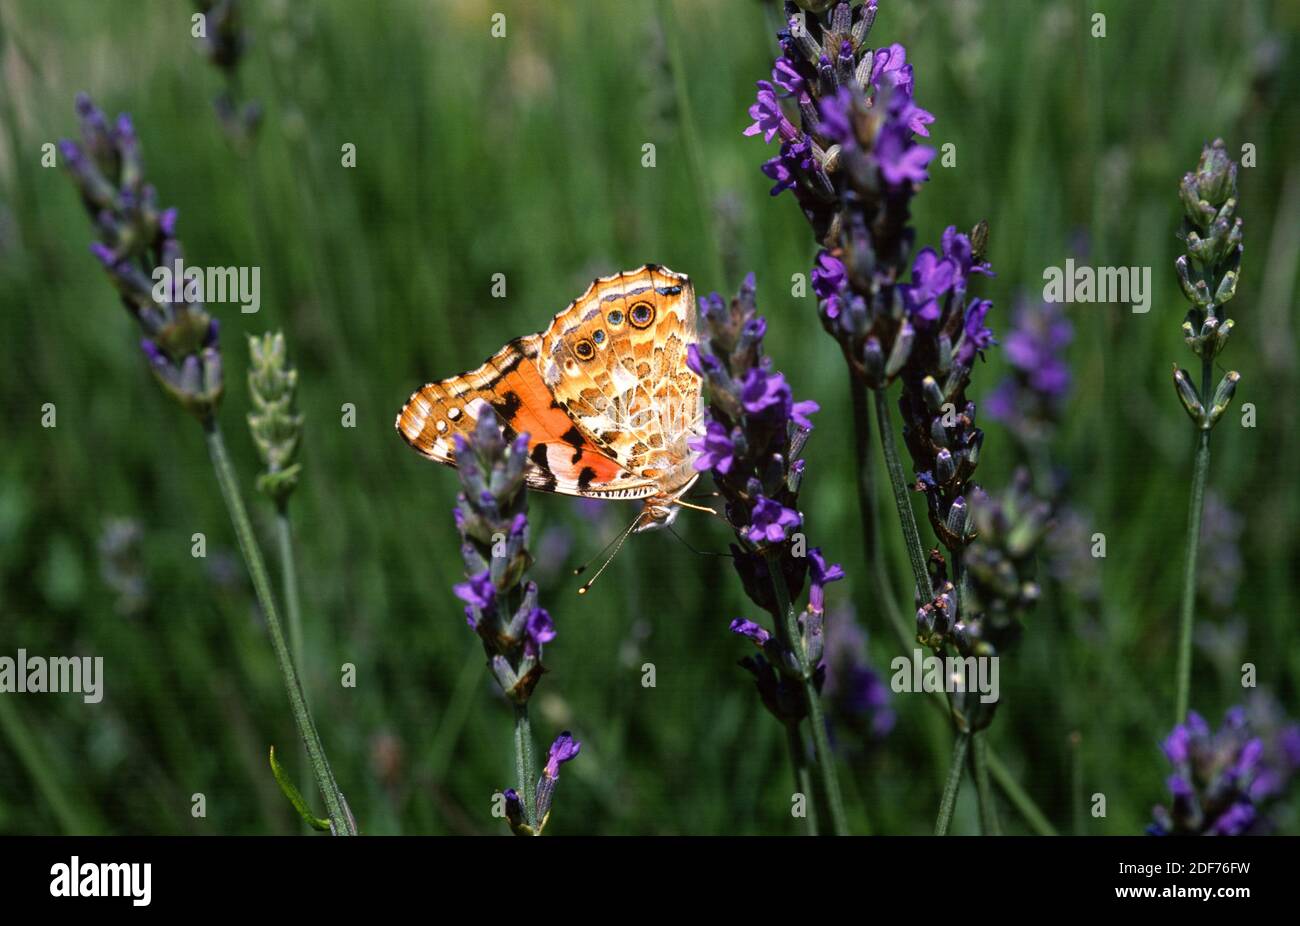 Painted lady (Cynthia cardui or Vanessa cardui) is a cosmopolitan butterfly. Adult. Stock Photo